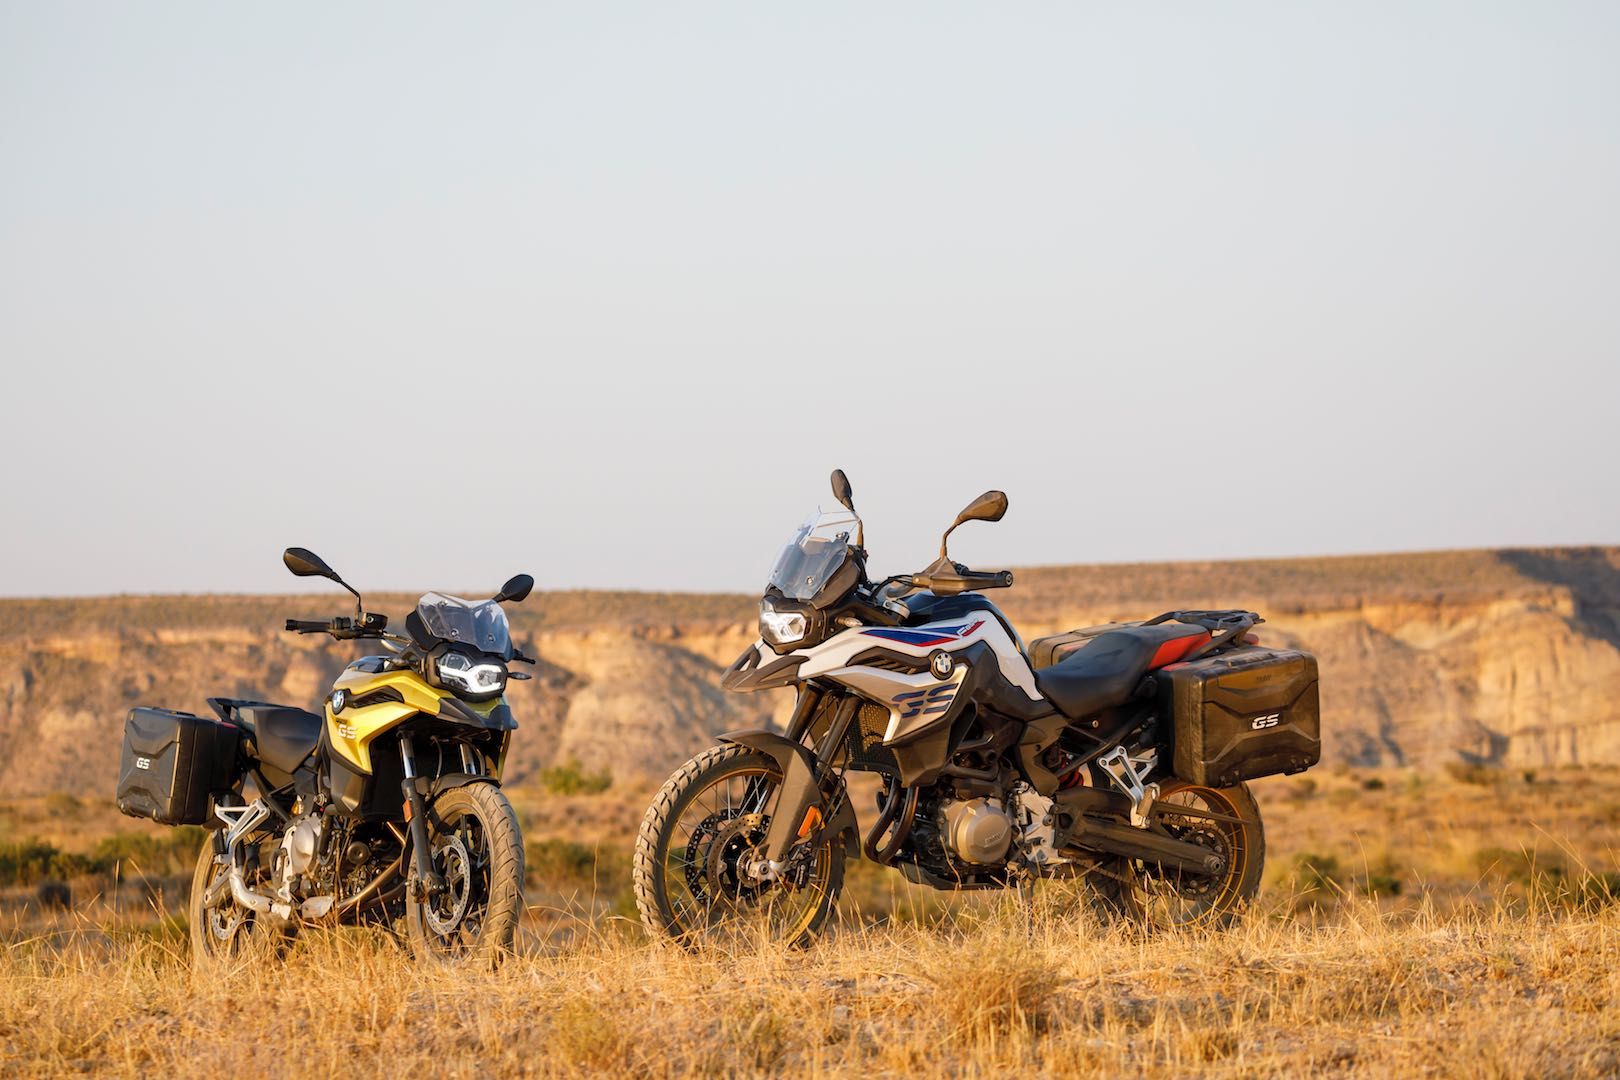 The prices and availability of the F750GS & F850GS are yet to be announced.